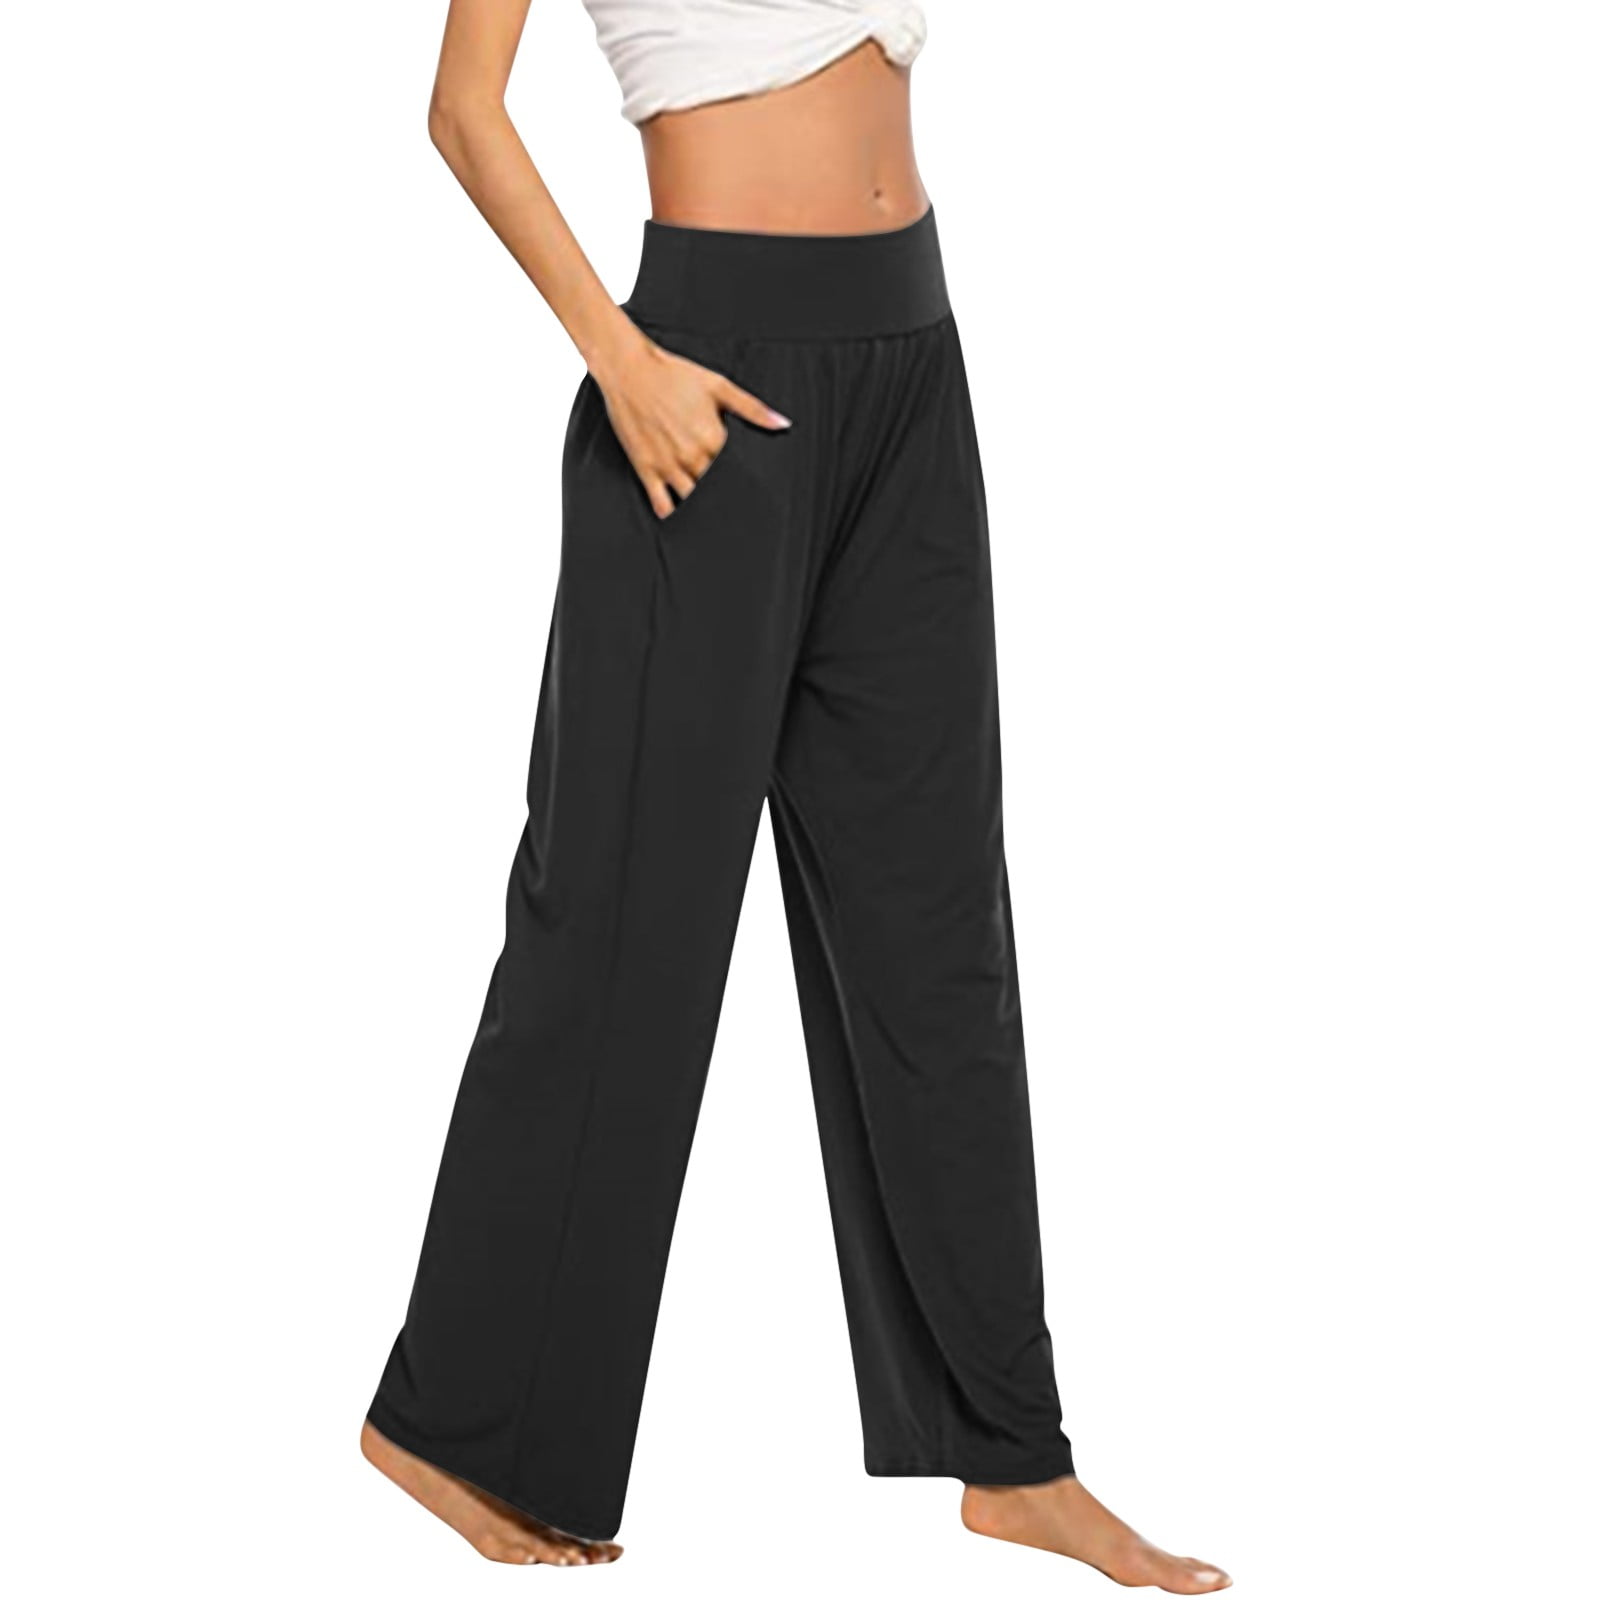 HSMQHJWE Womens Black Yoga Pants Petite On Dress Pants For Women Business  Casual Womens Yoga Sweatpants Comfy Loose Casual Wide Leg Lounge Joggers  Pants With Pockets Trousers For Women 